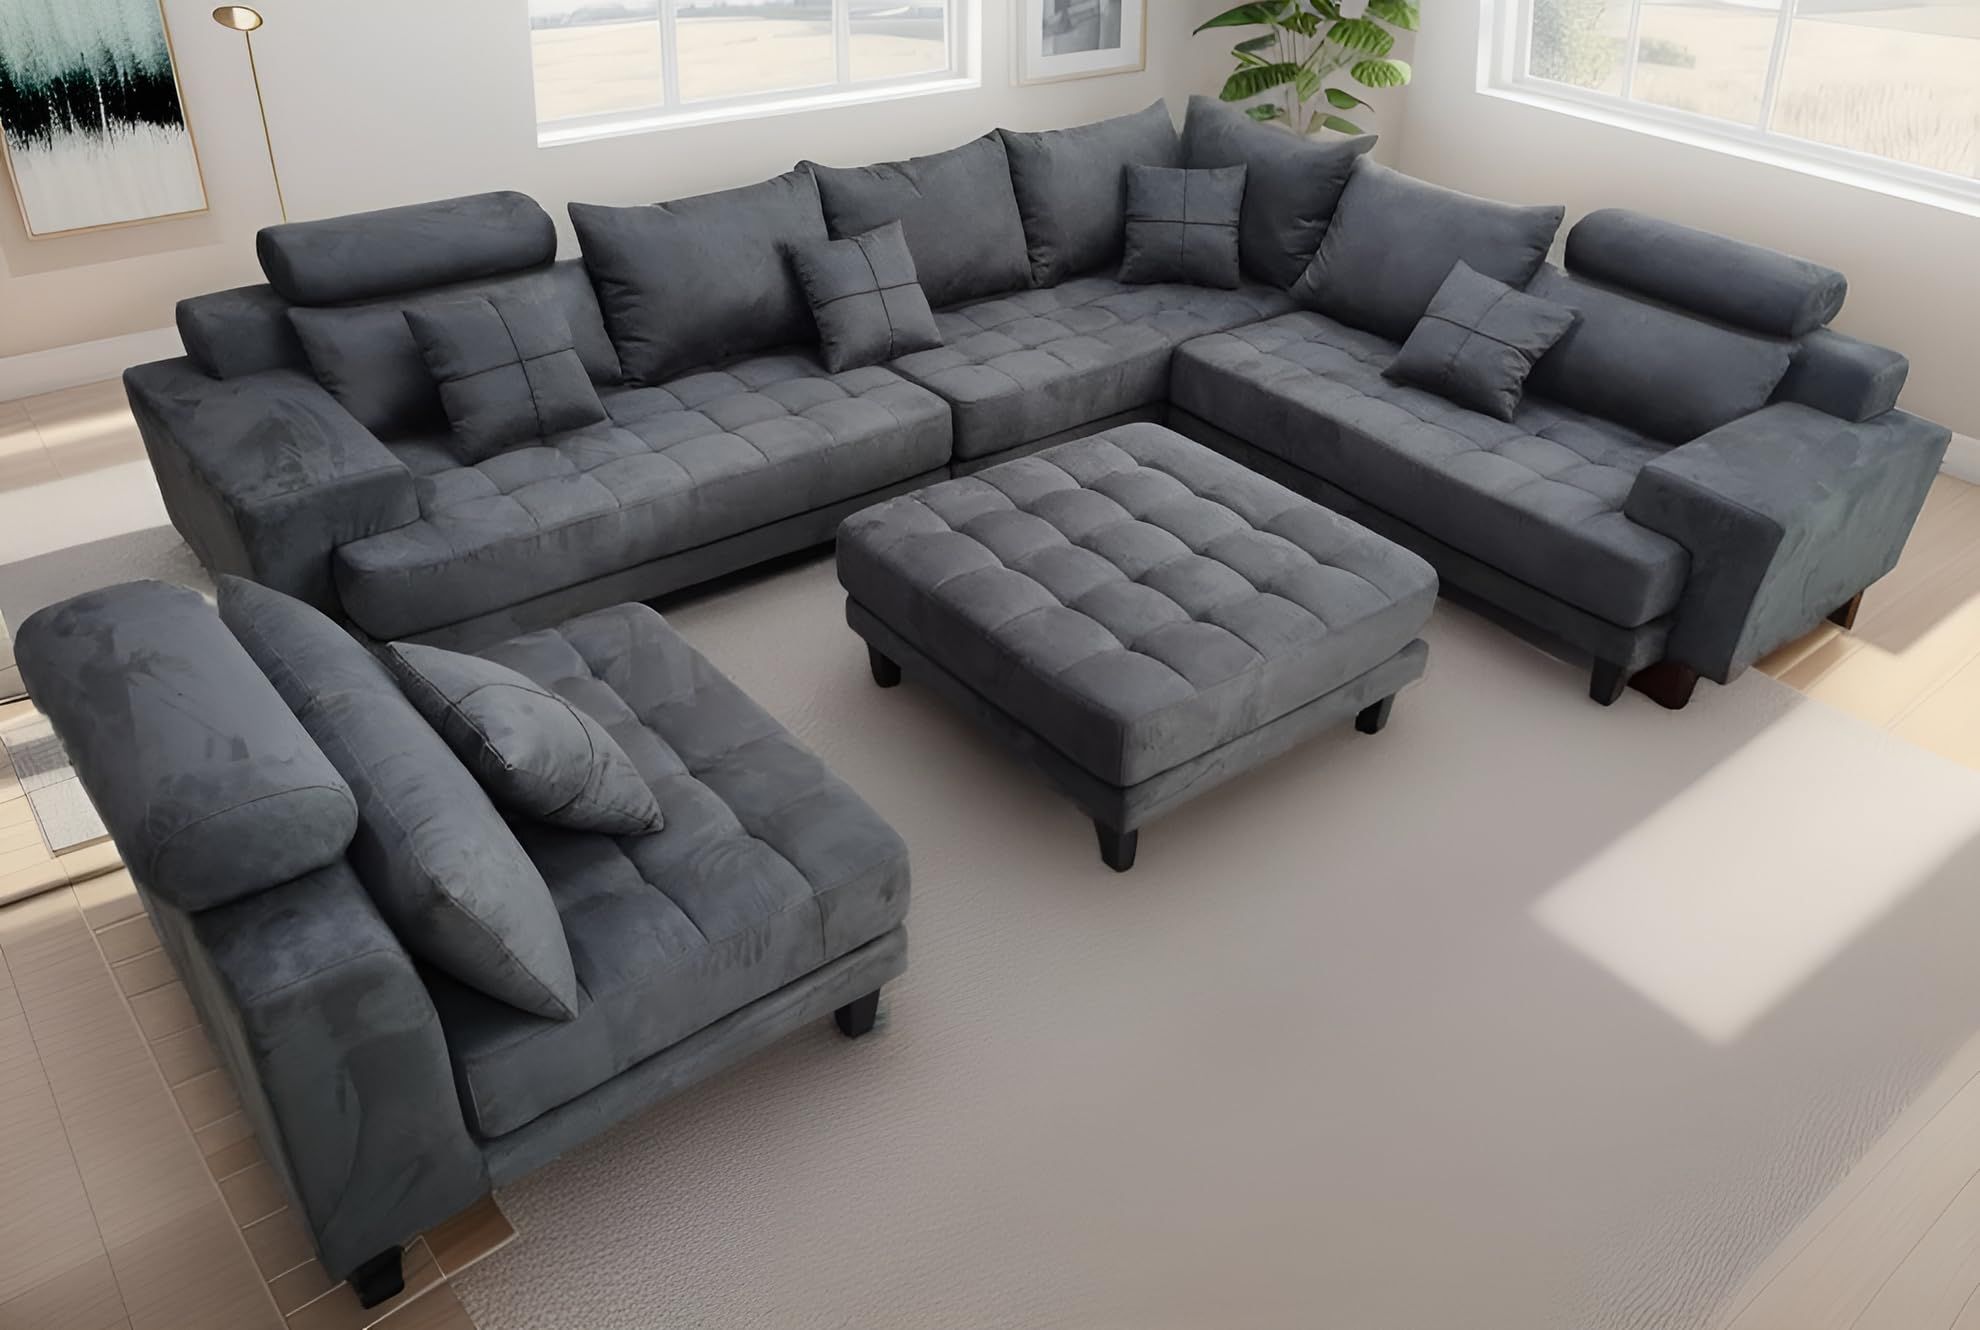 The Ultimate Guide to Choosing Sectional Couch Living Room Sets